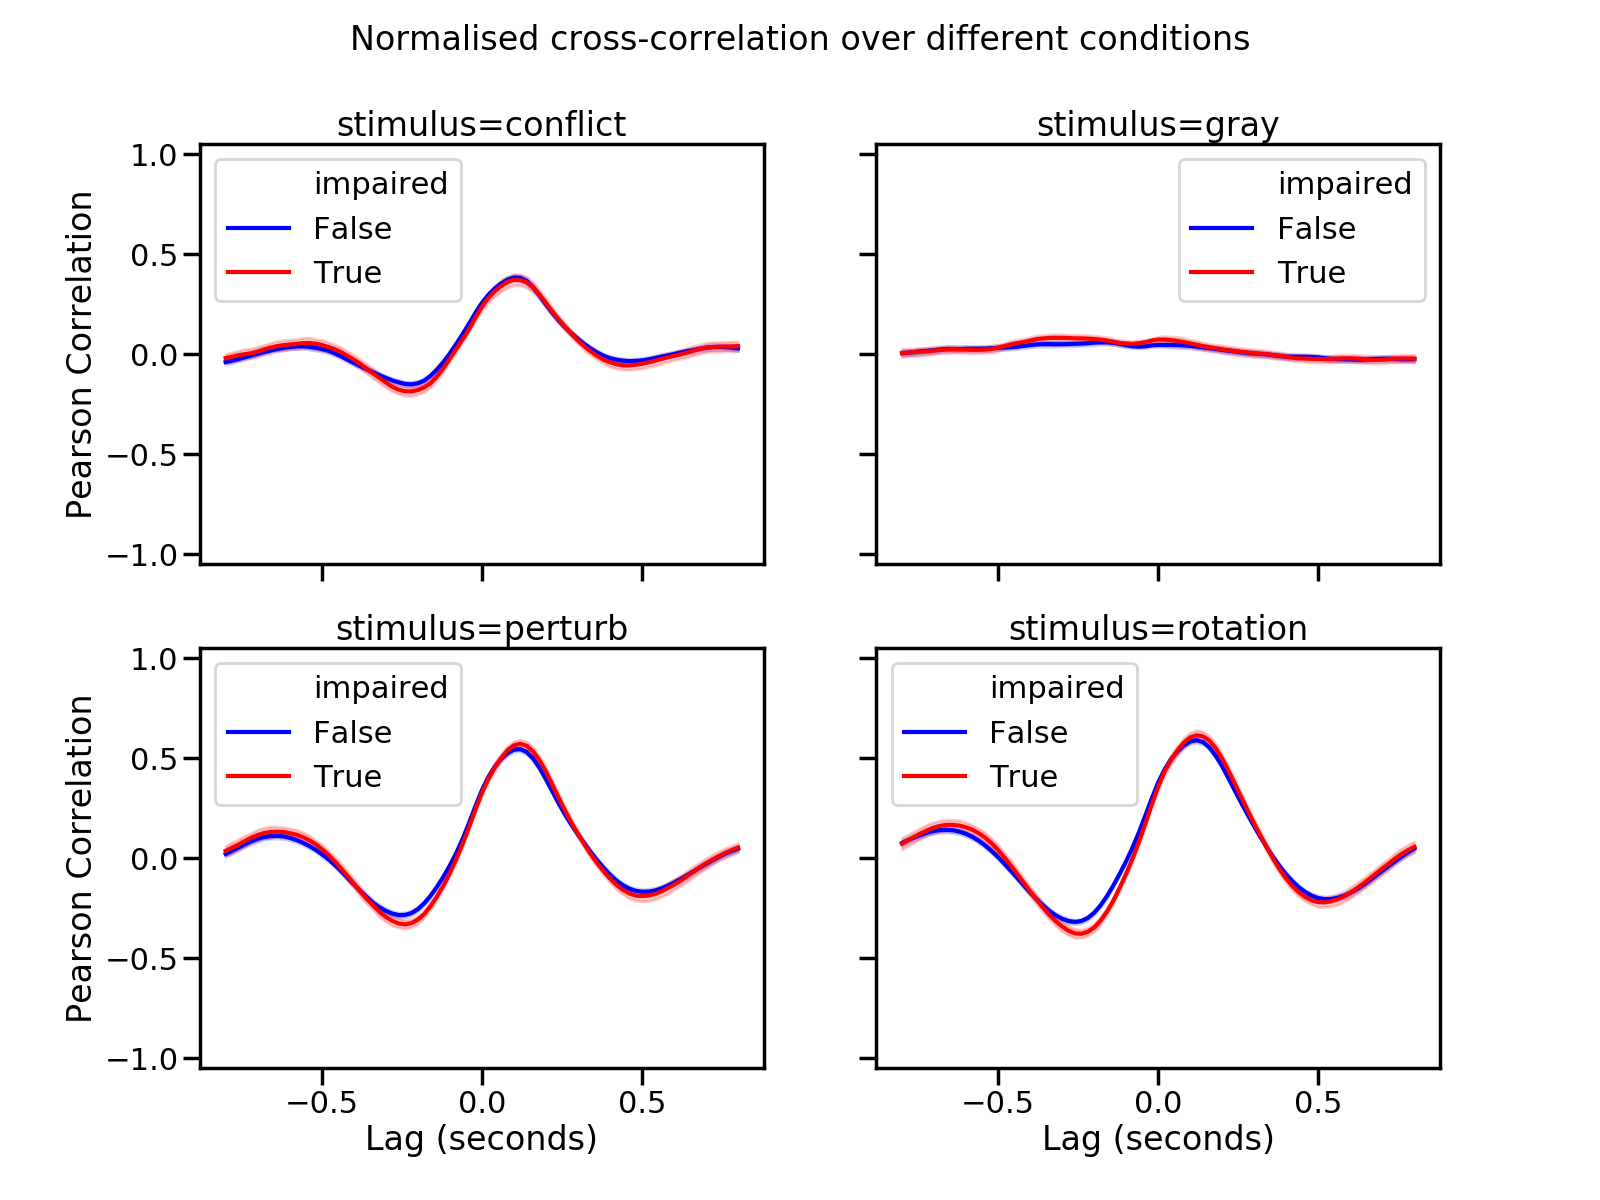 Cross-correlation of animal turning rate vs stimulus rotational speed, comparing flies with impaired neuropeptide function vs non-impaired (control). When the stimulus is invisible to the fly (stimulus=gray), no correlation is observed, which is to be expected. For the other three stimuli we can observe two main bumps in correlation: one a bit before lag 0 (corresponding to the stumuli "reacting" to the fly) and one after 0 (corresponding to the fly reacting to the stimuli). The magnitude of the peak correlation is lower in the stimulus=conflict condition, which is also to be expected as the fly is "distracted" by a virtual post - that is, the fly is "conflicted" between its so called "optomotor response", its innate tendency to correct correct course, and its so called "fixation" response, its tendency to fly towards certain objects.